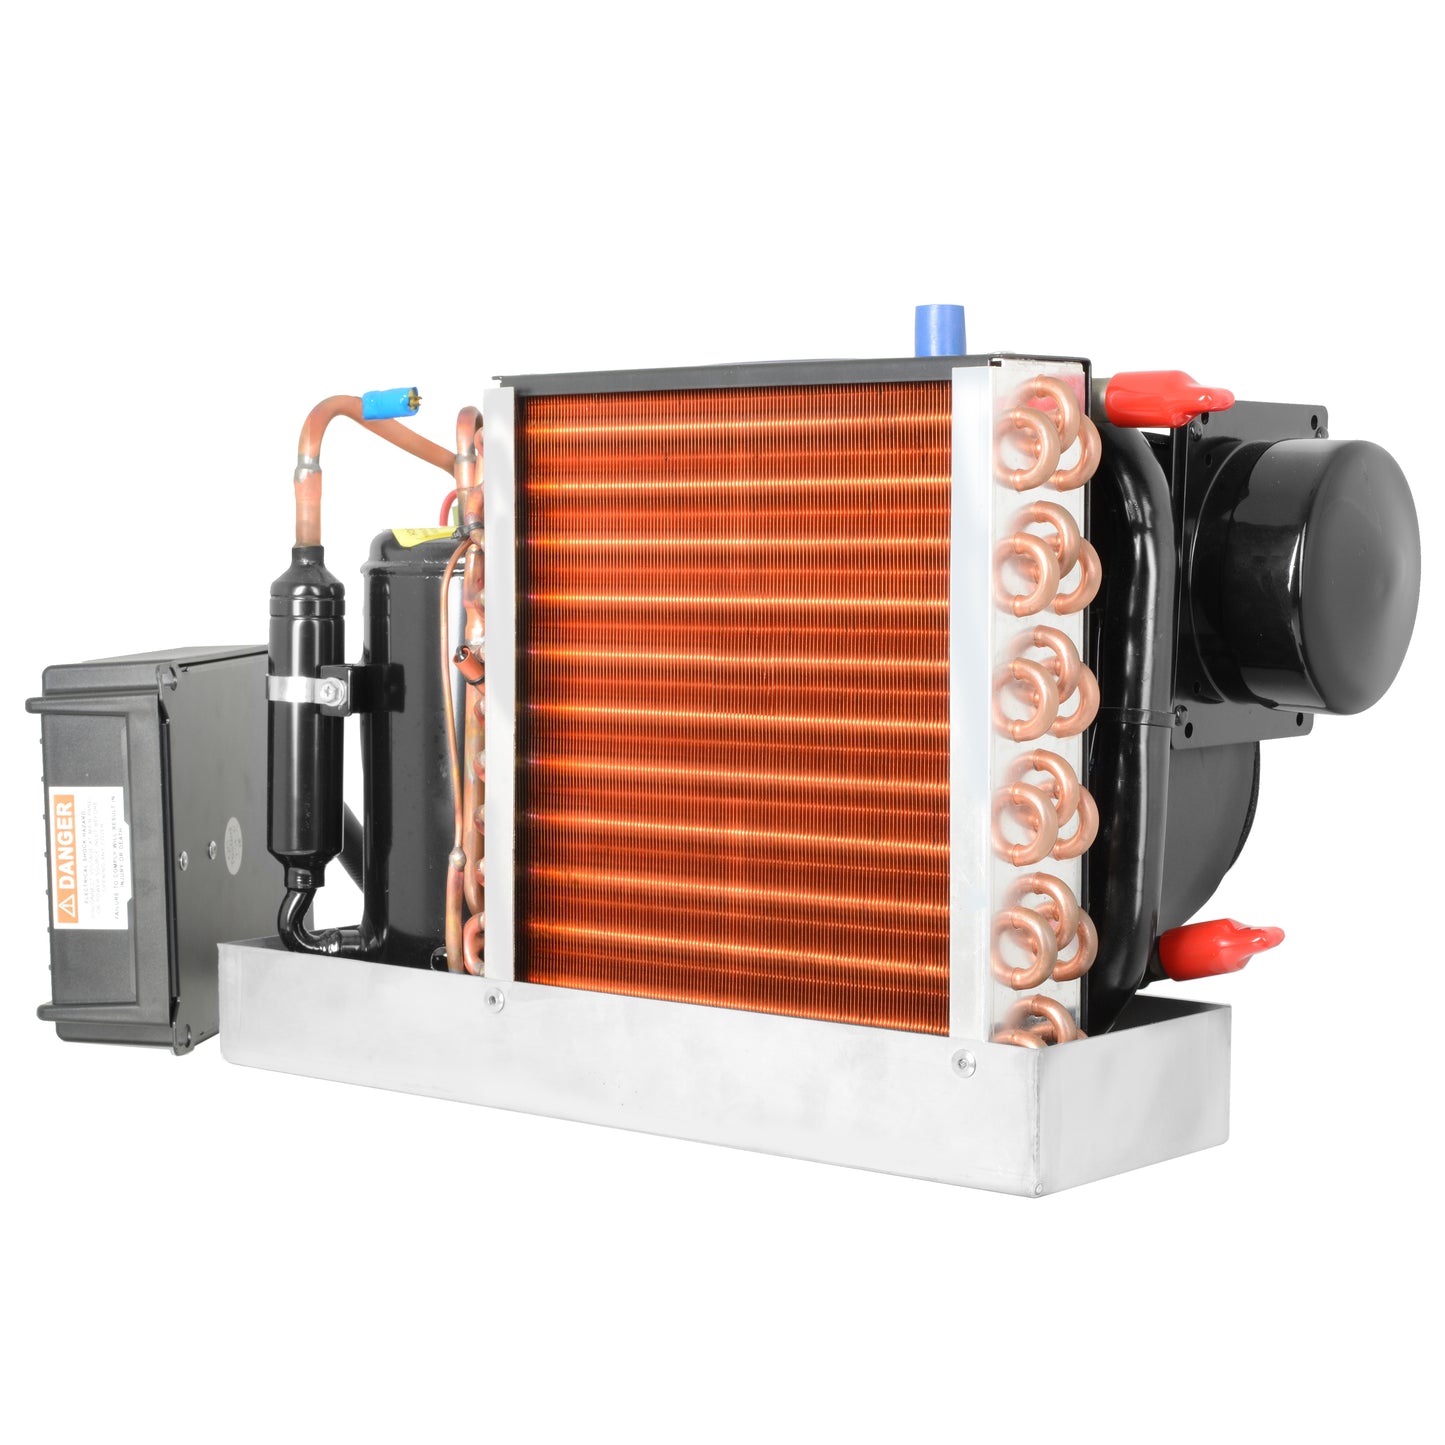 SELF-CONTAINED 12000 BTU 115V 50/60HZ MARINE AIR CONDITIONER COPPER FIN (HEATING AND COOLING) by MABRU